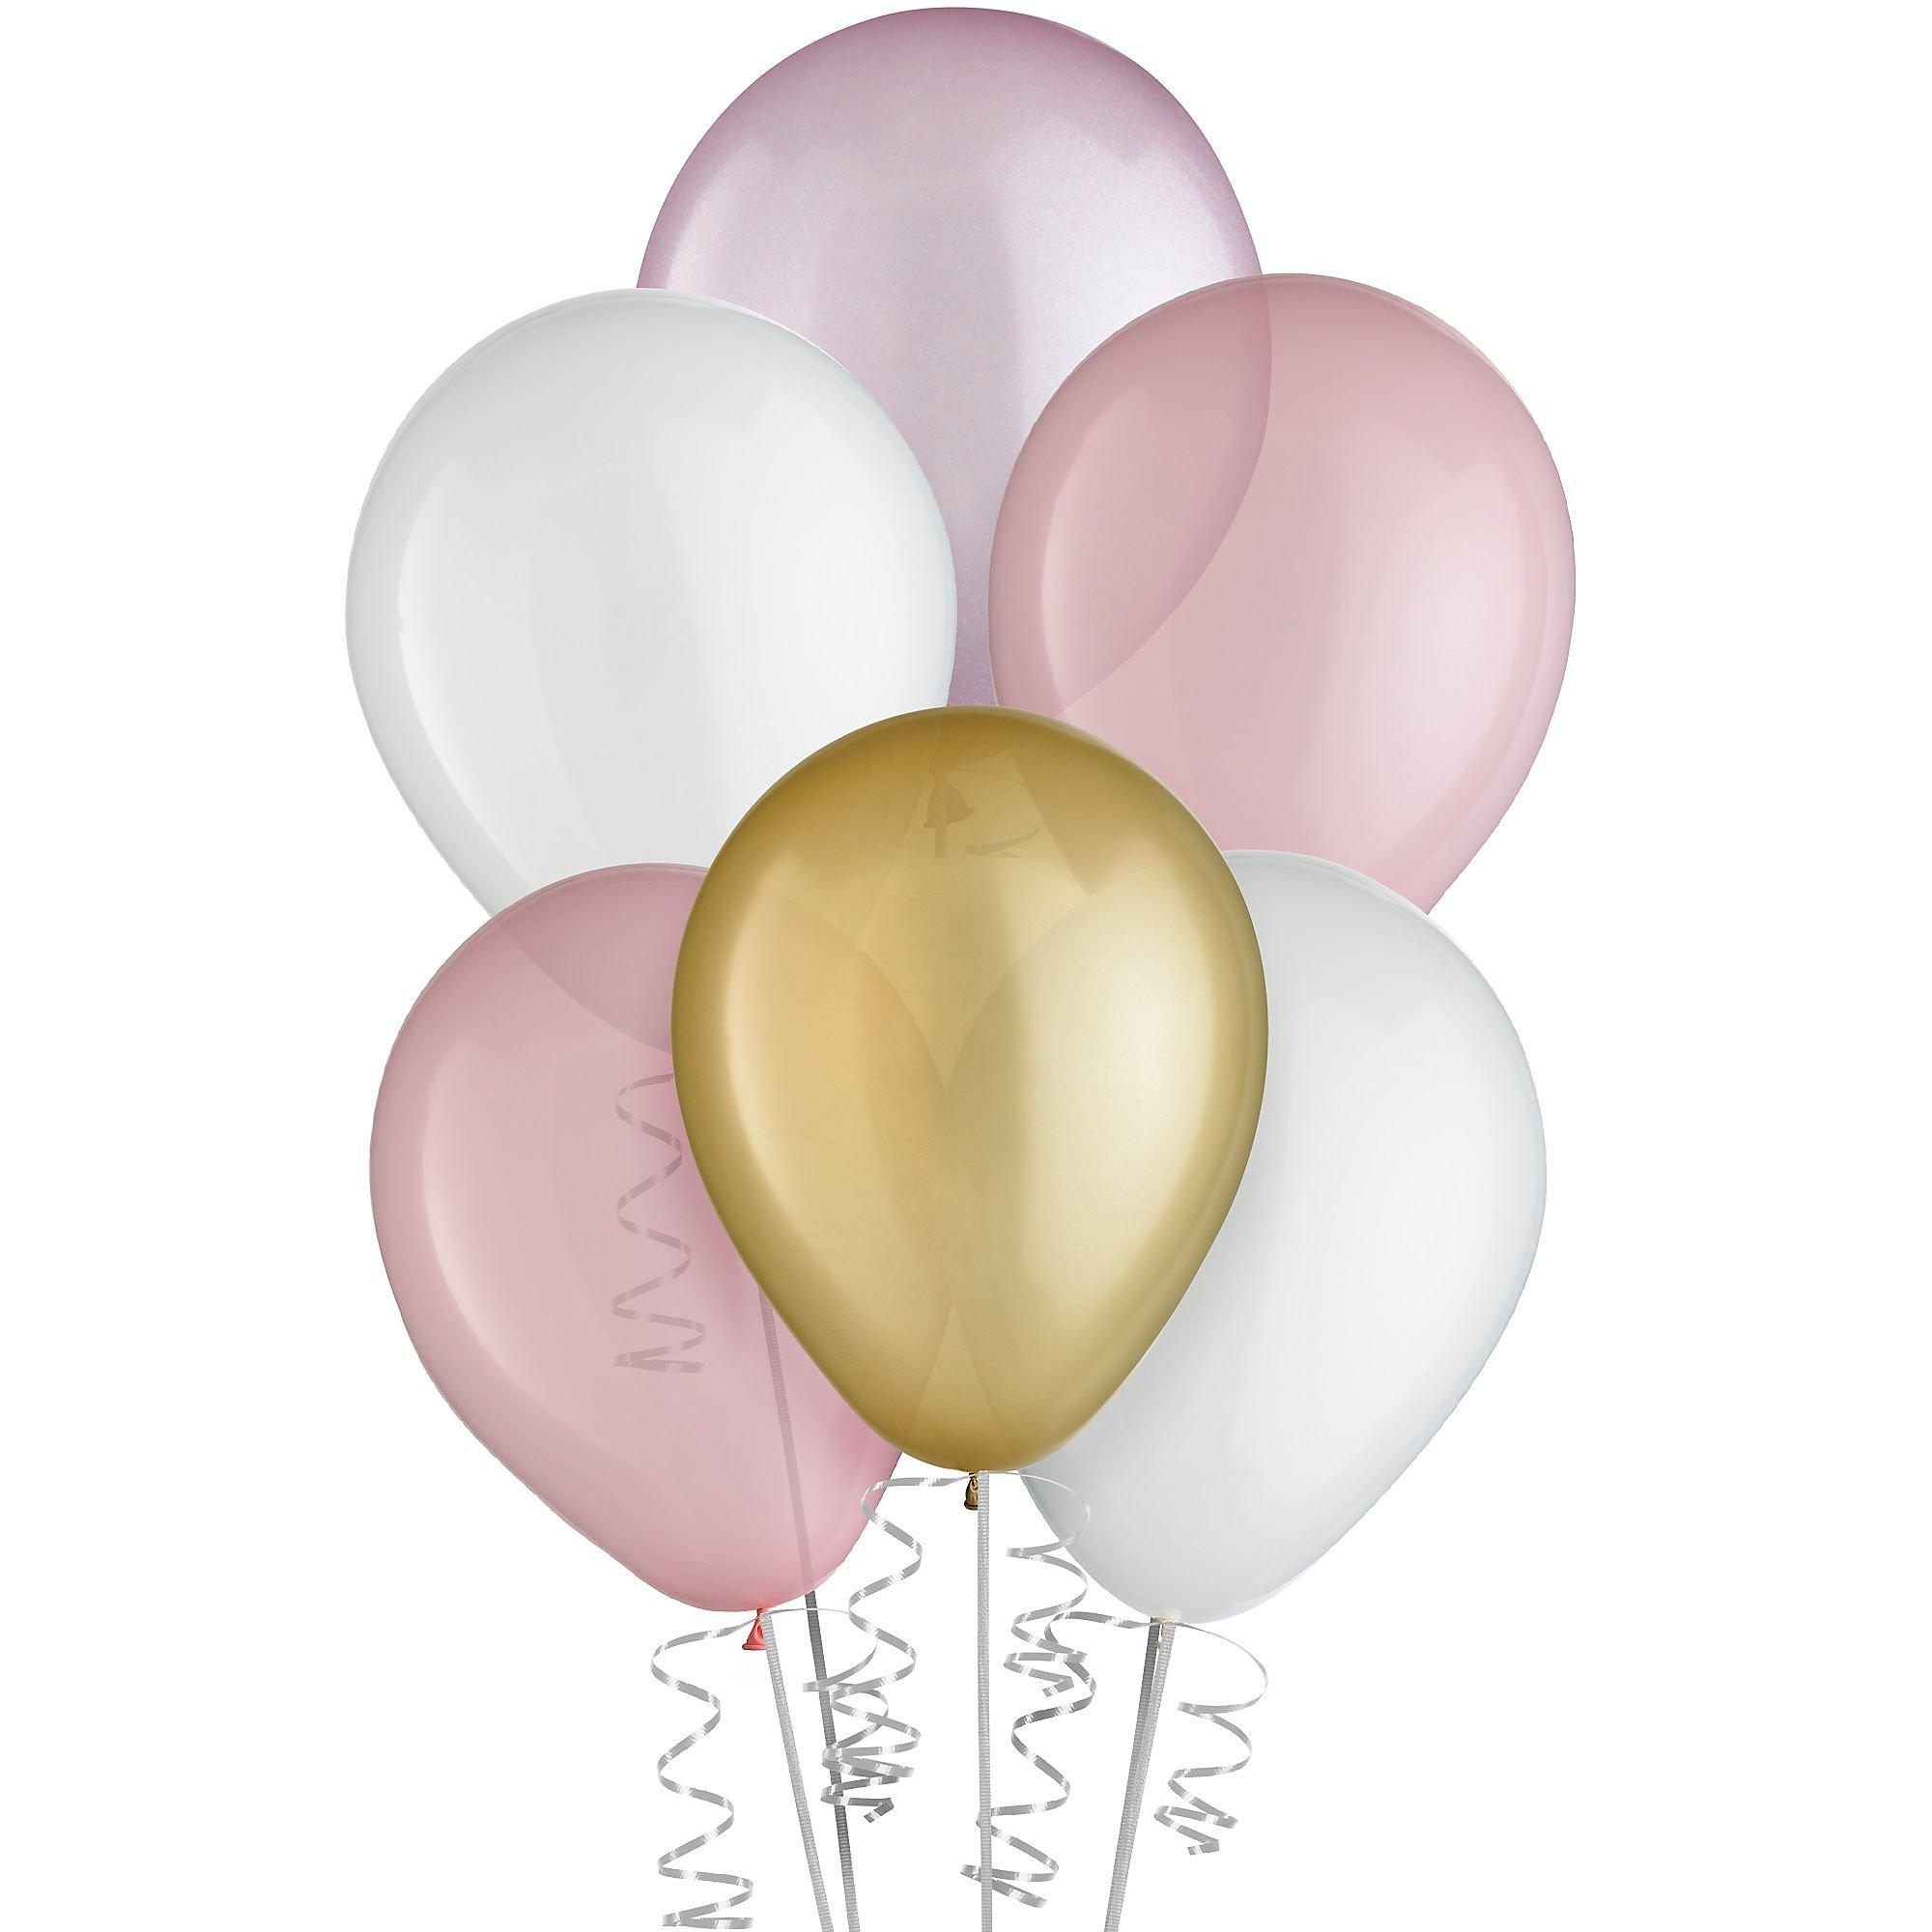 15ct, 11in, Pastel Pink 4-Color Mix Latex Balloonst - Pinks, Gold & White